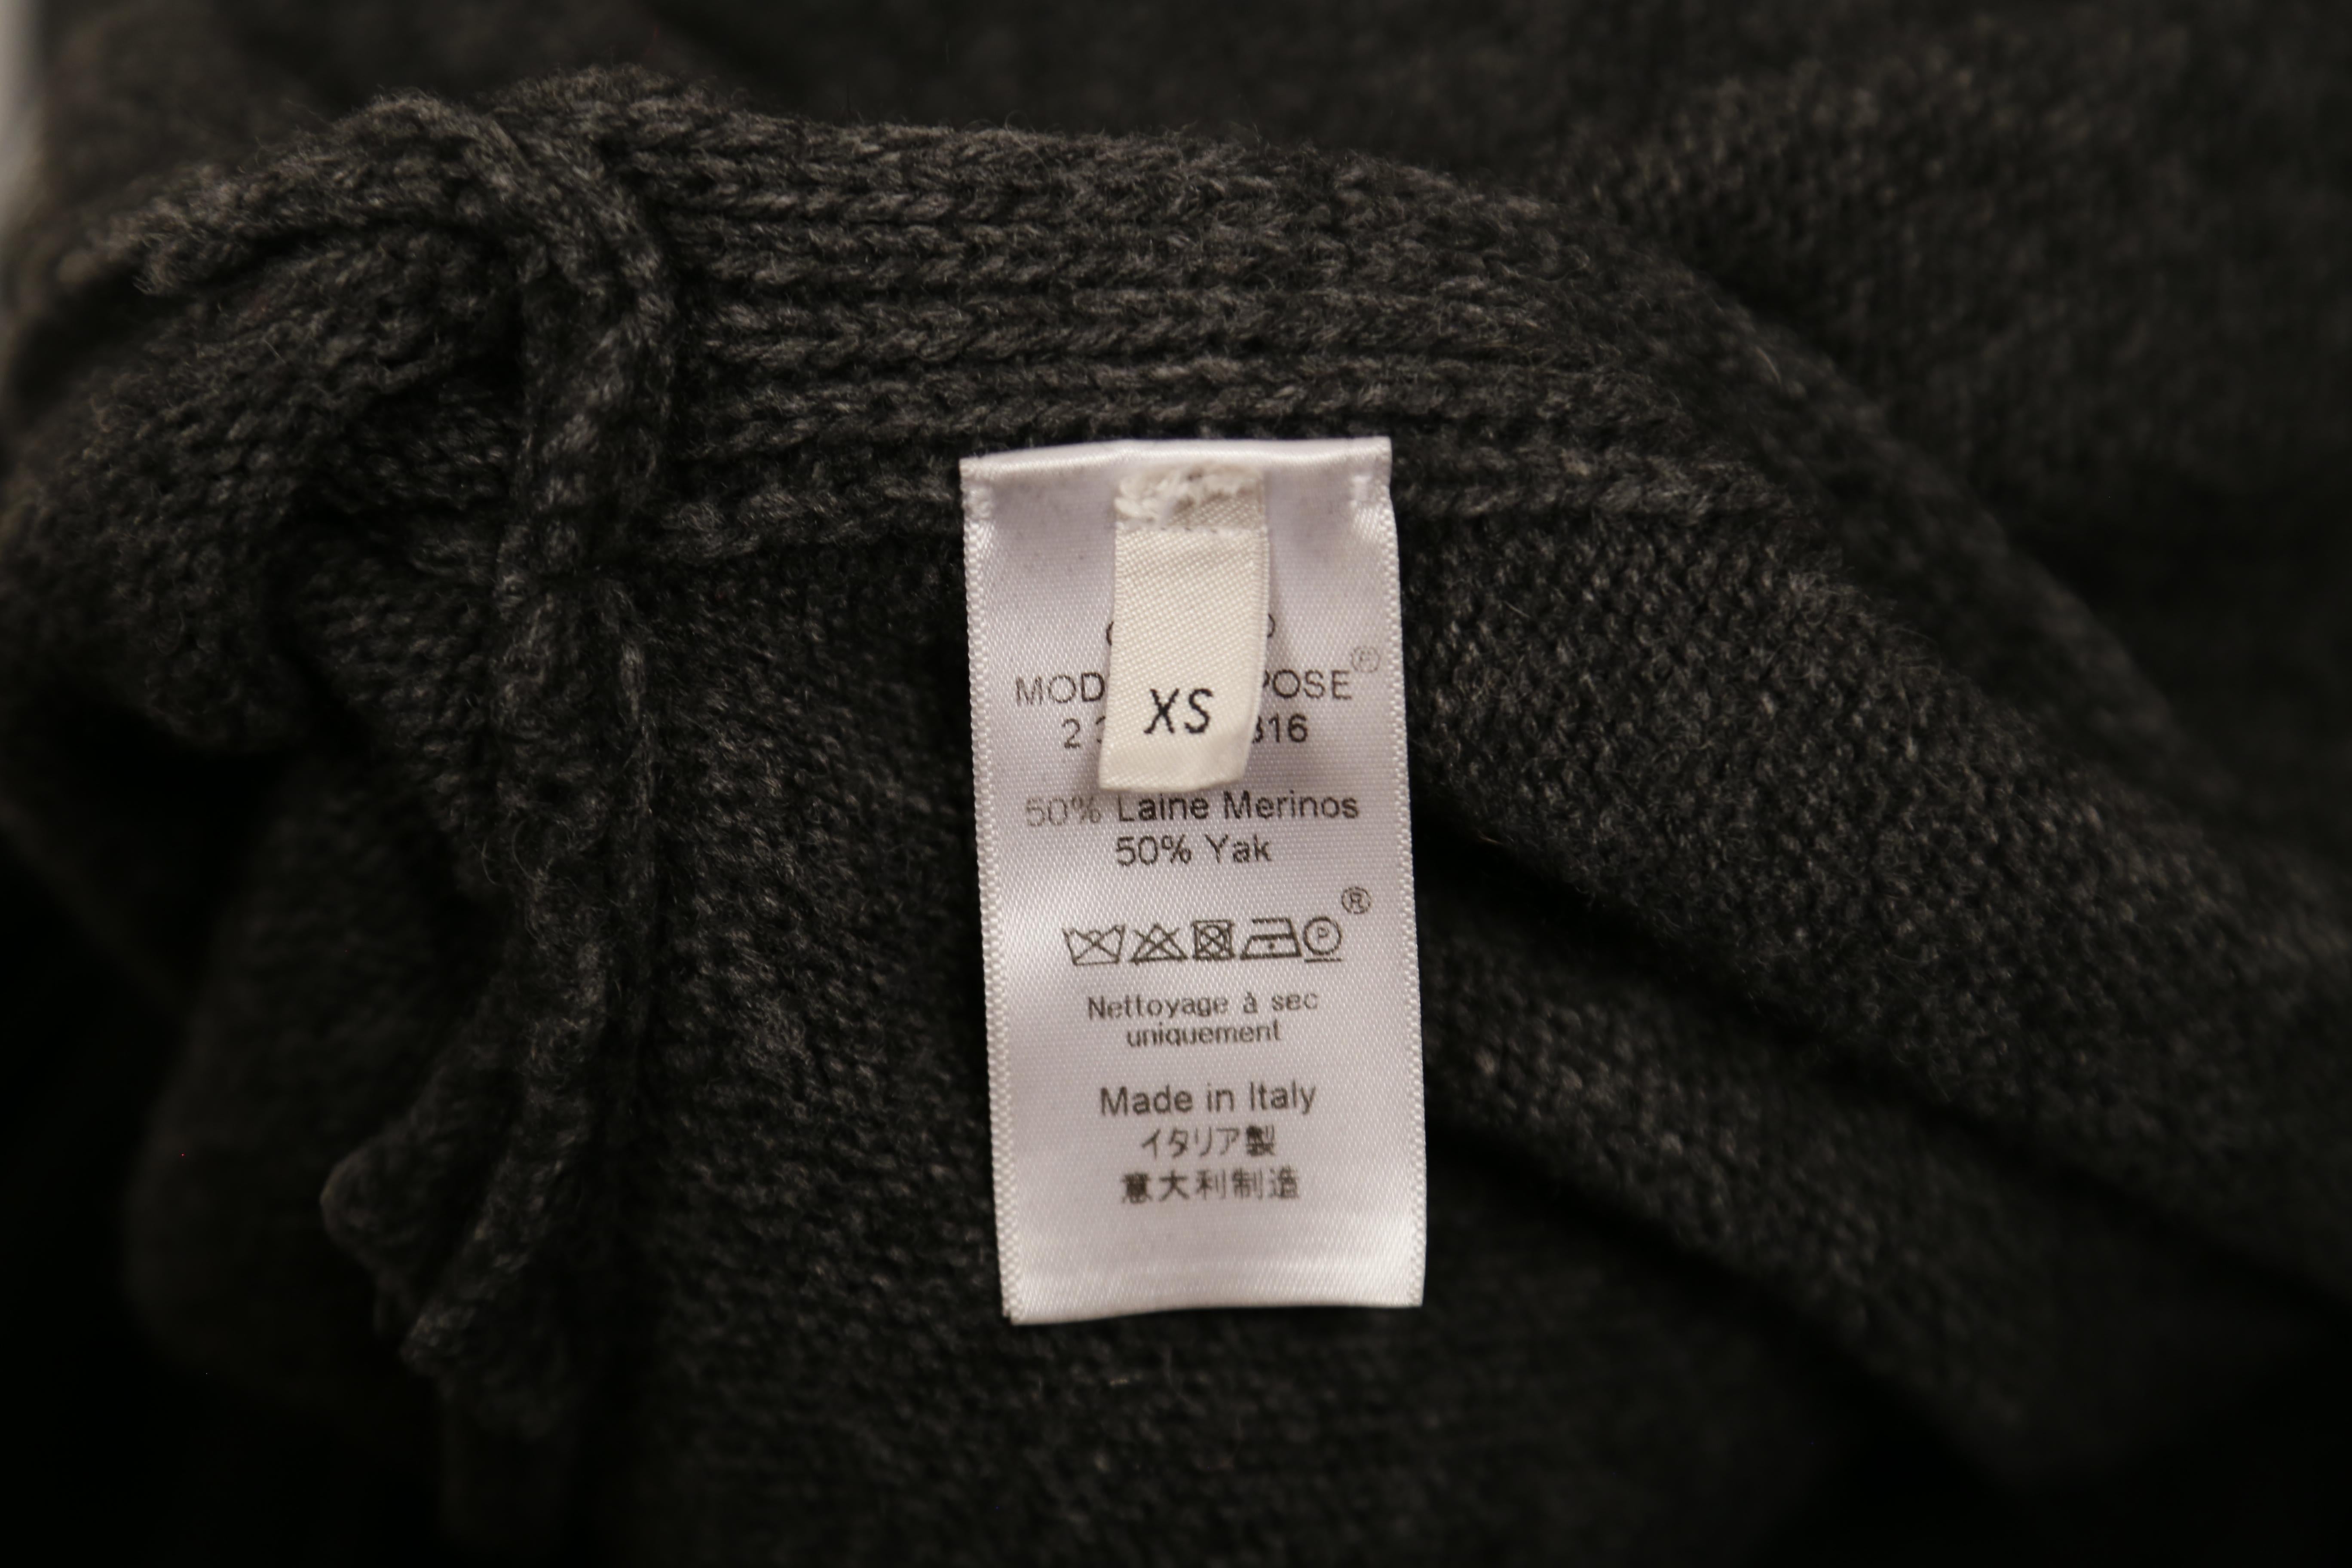 CELINE by PHOEBE PHILO marled dark grey sweater with patch pocket and split side For Sale 3